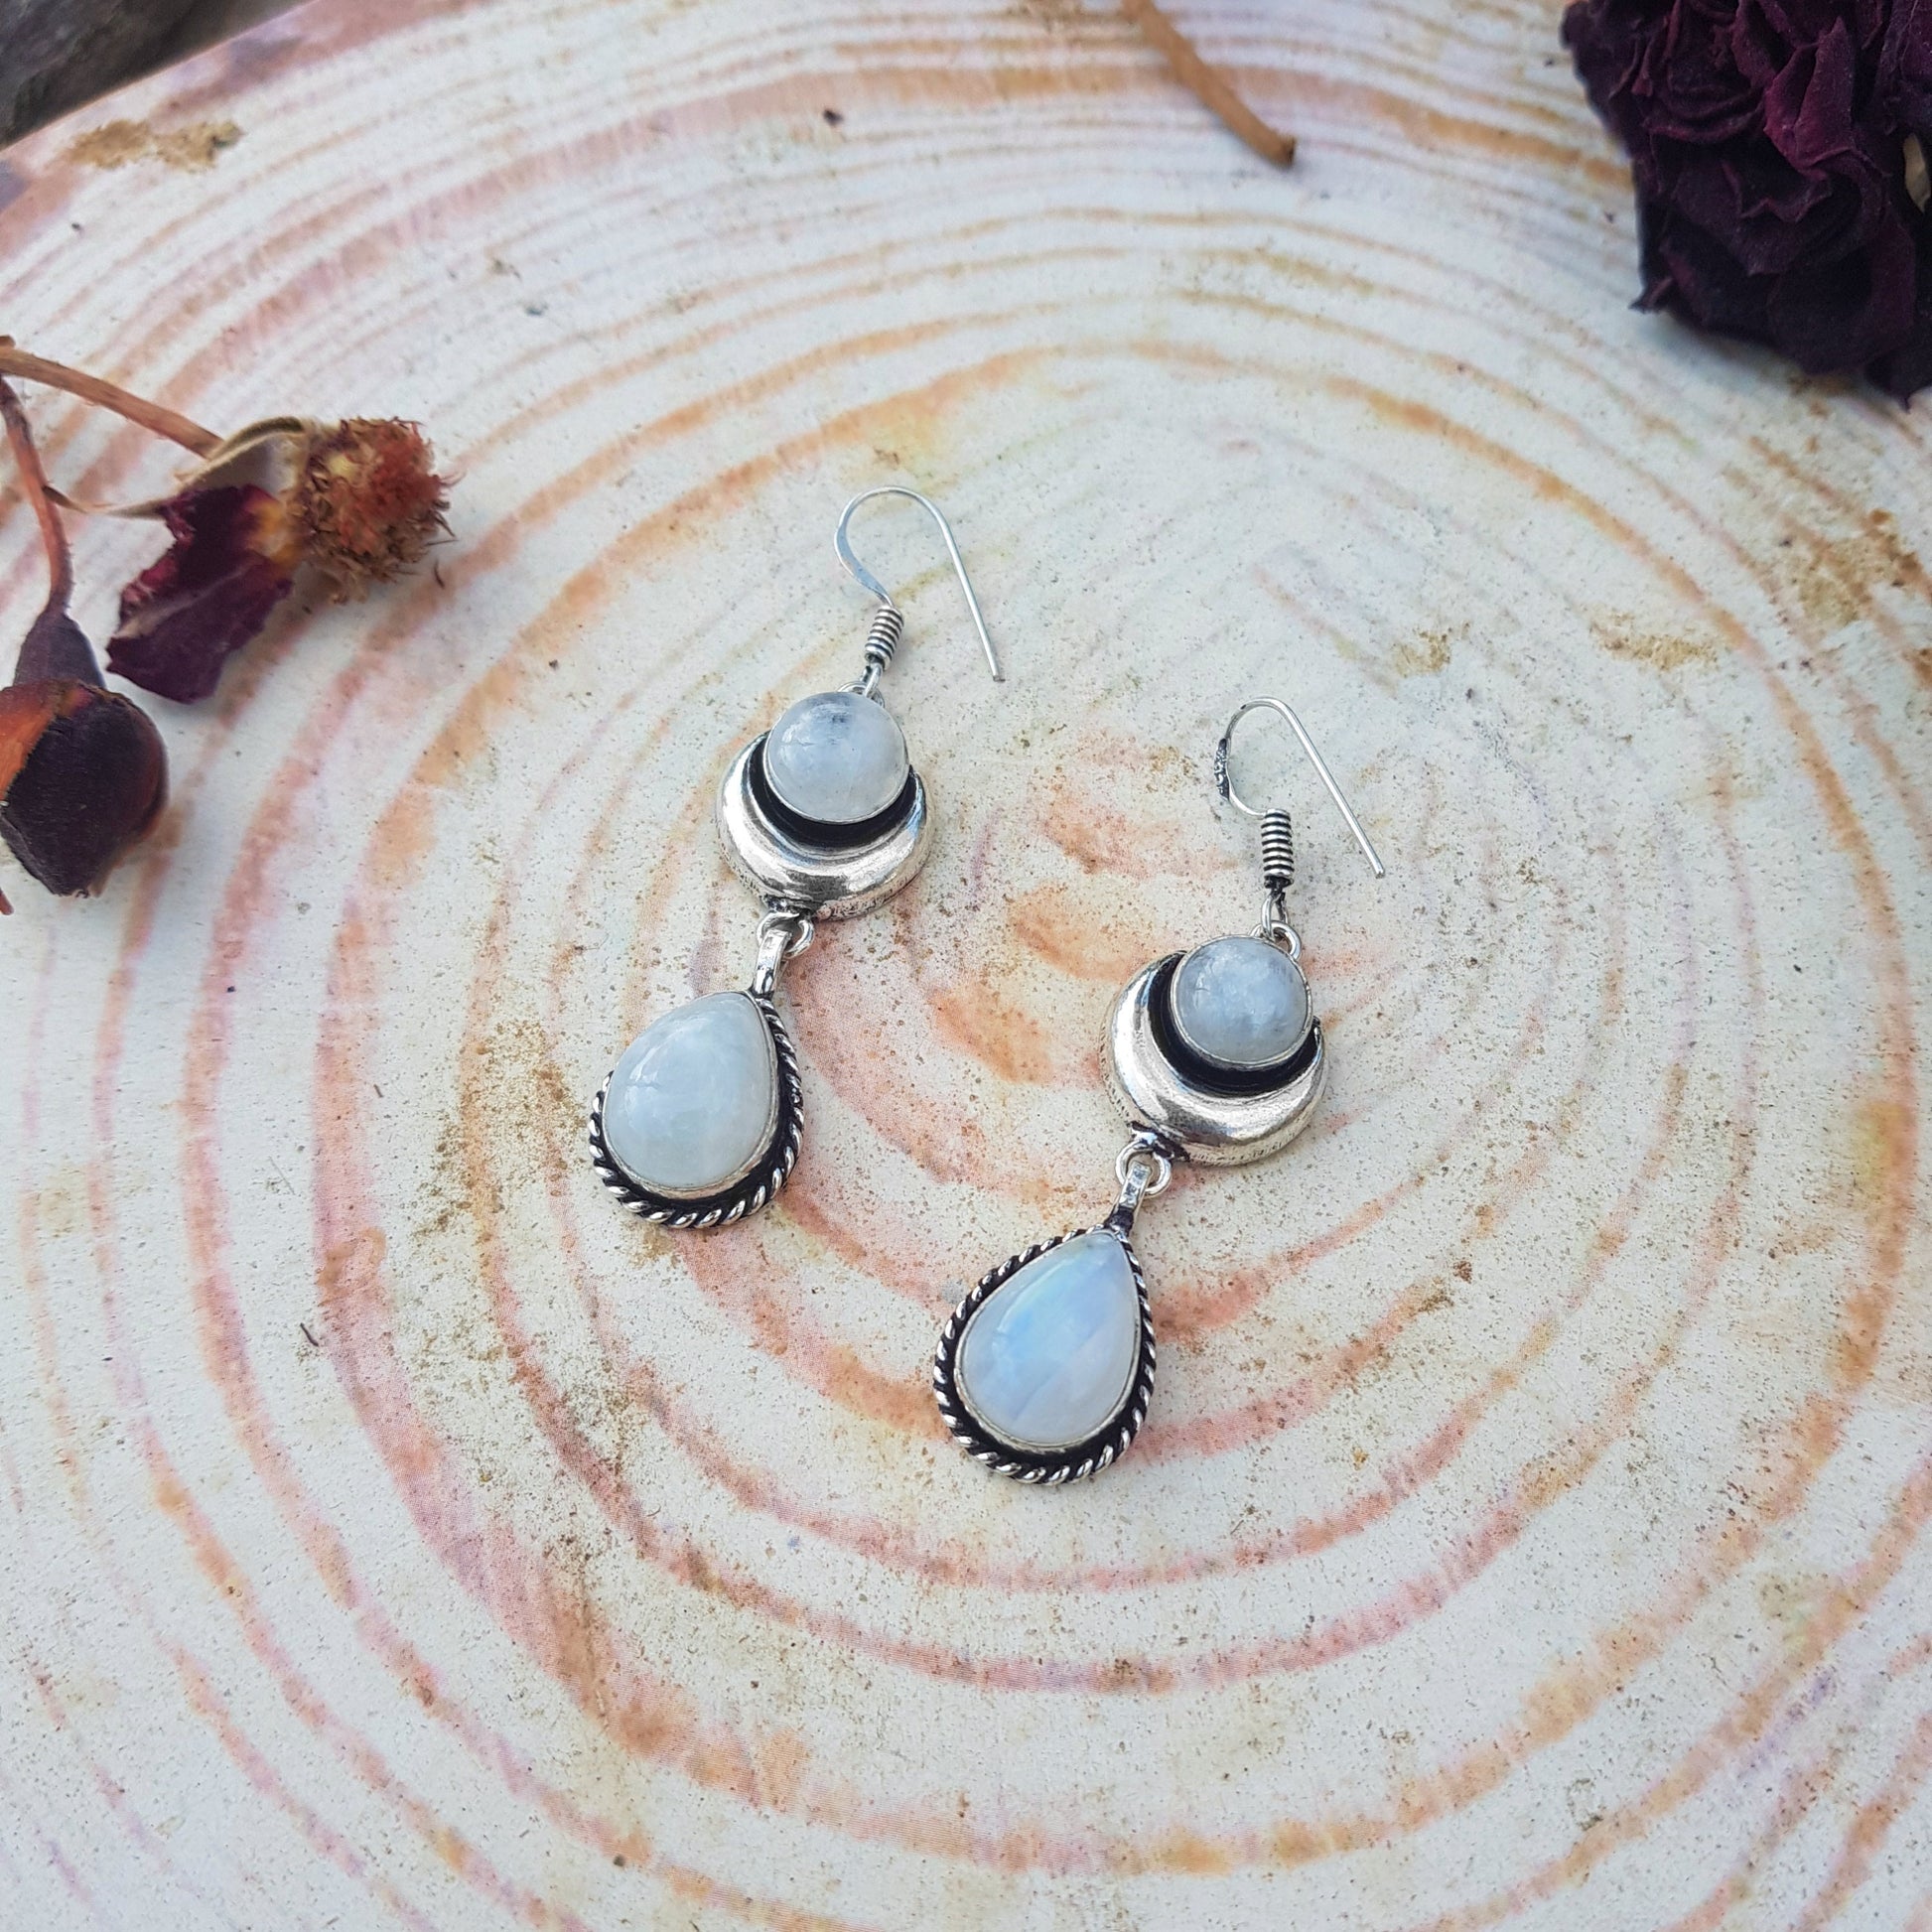 White Moonstone Earrings Sterling Silver Big Dangle Earrings Statement Earrings Boho Gemstone Earrings Unique Jewellery